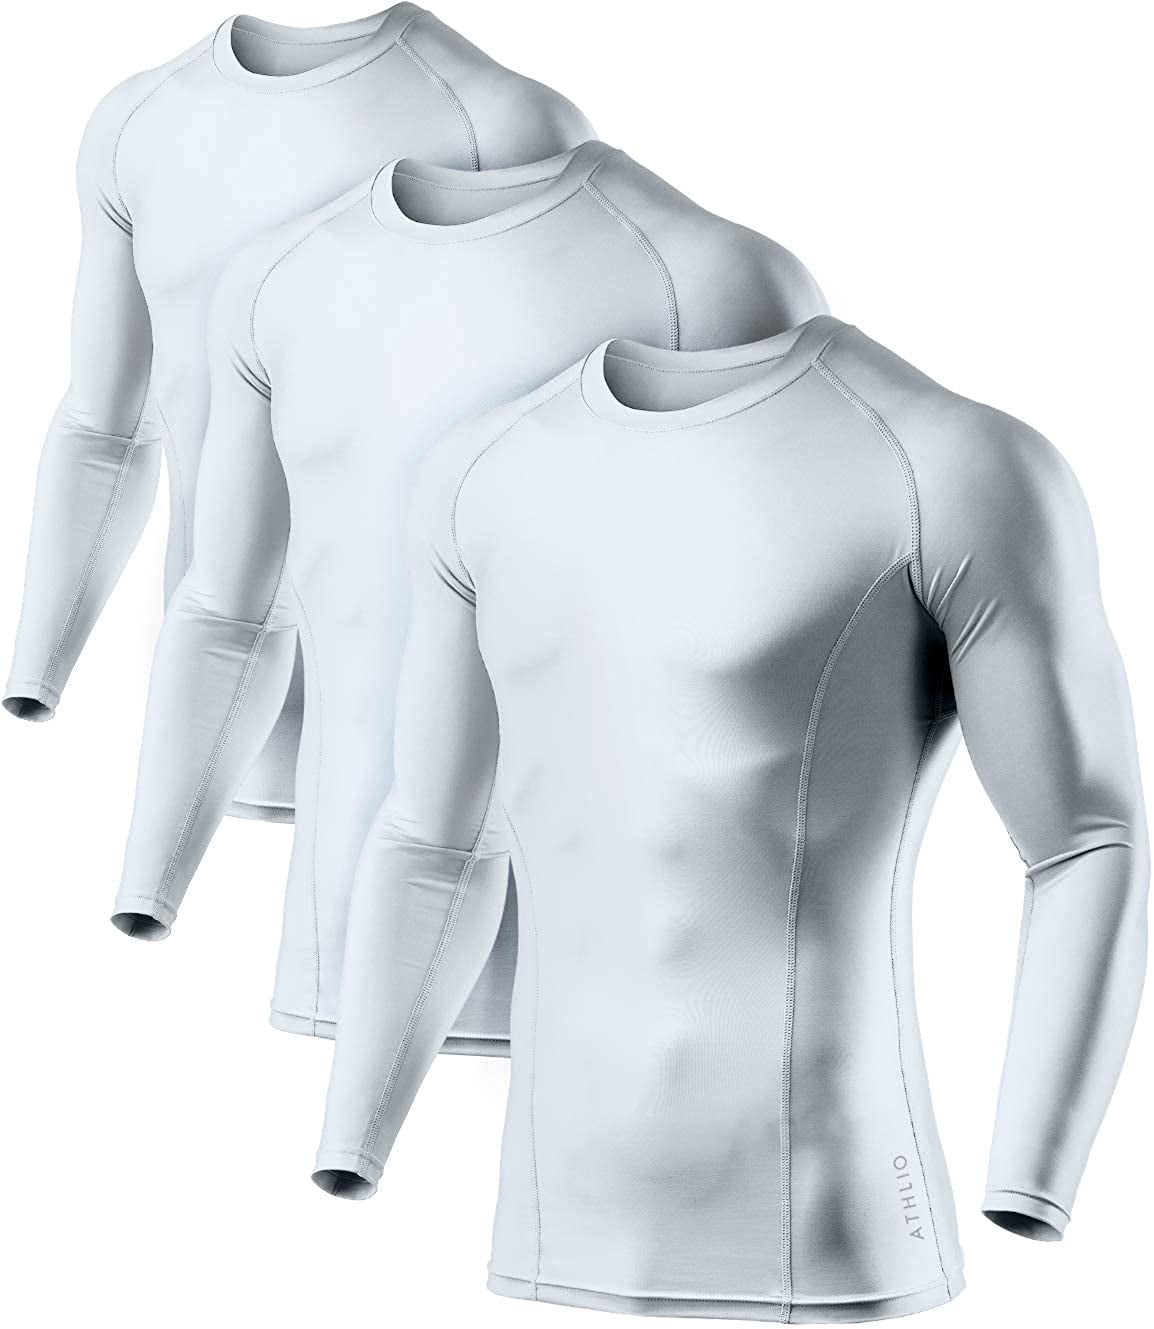 Athletic Workout Shirt TSLA Mens Cool Dry Fit Long Sleeve Compression Shirts Active Sports Base Layer T-Shirt 